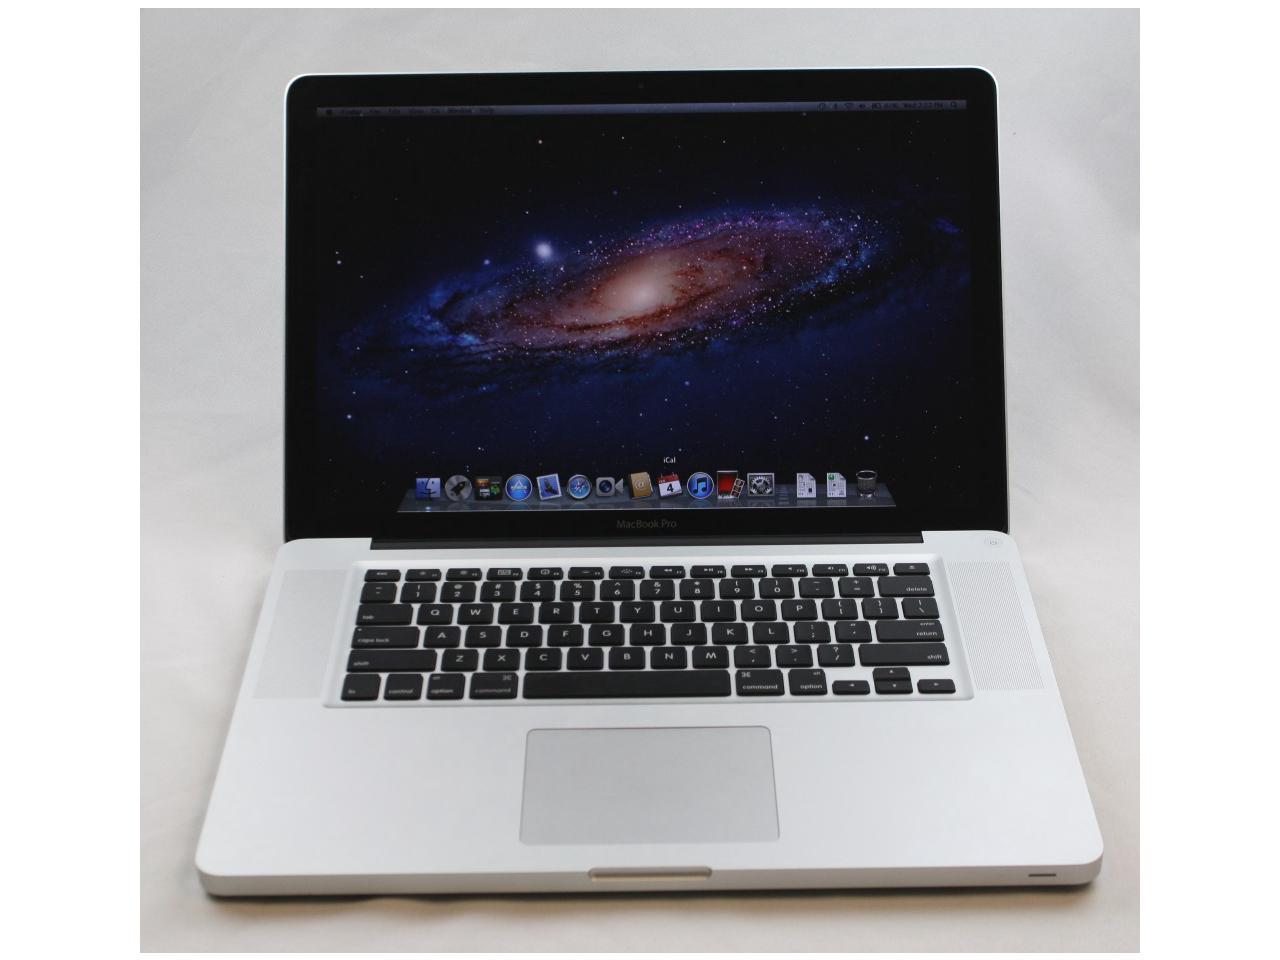 Macbook pro a1286 specifications